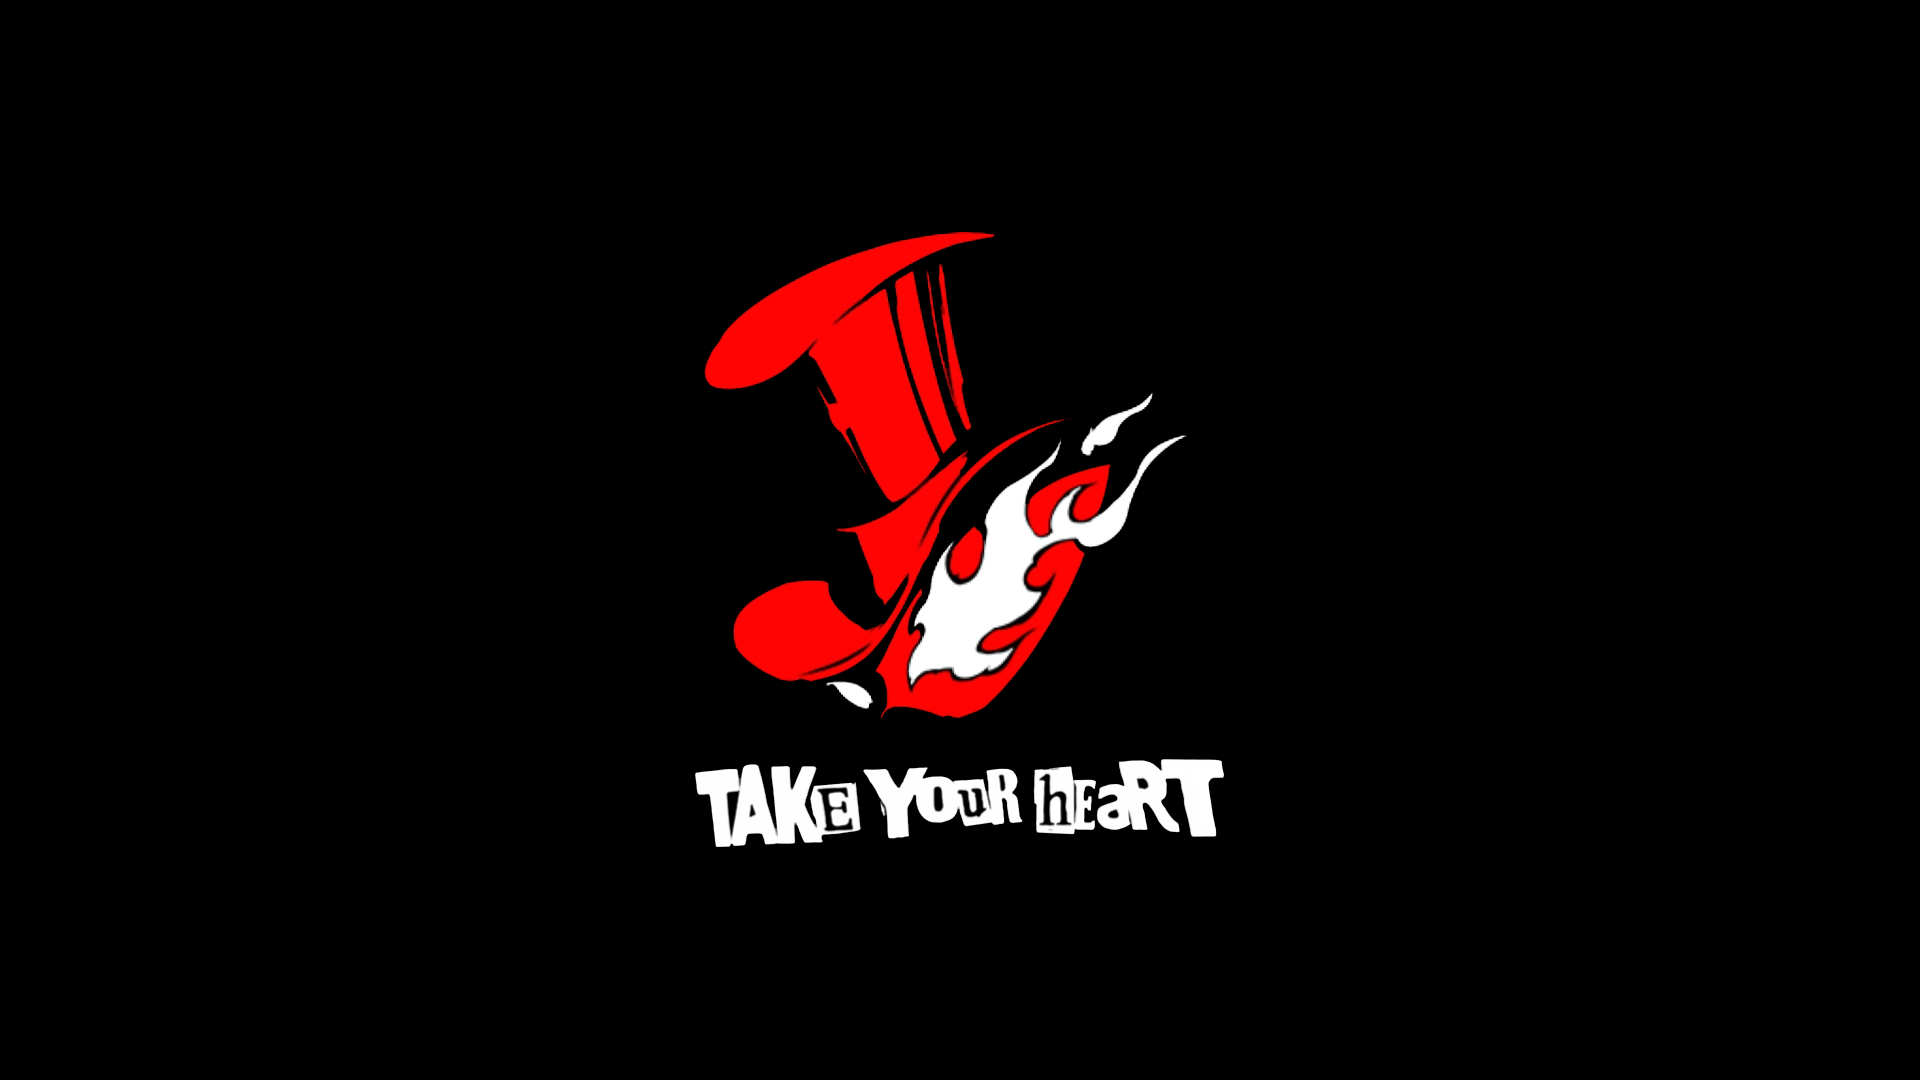 Persona 5 Logo Wallpapers - Top Free Persona 5 Logo Backgrounds